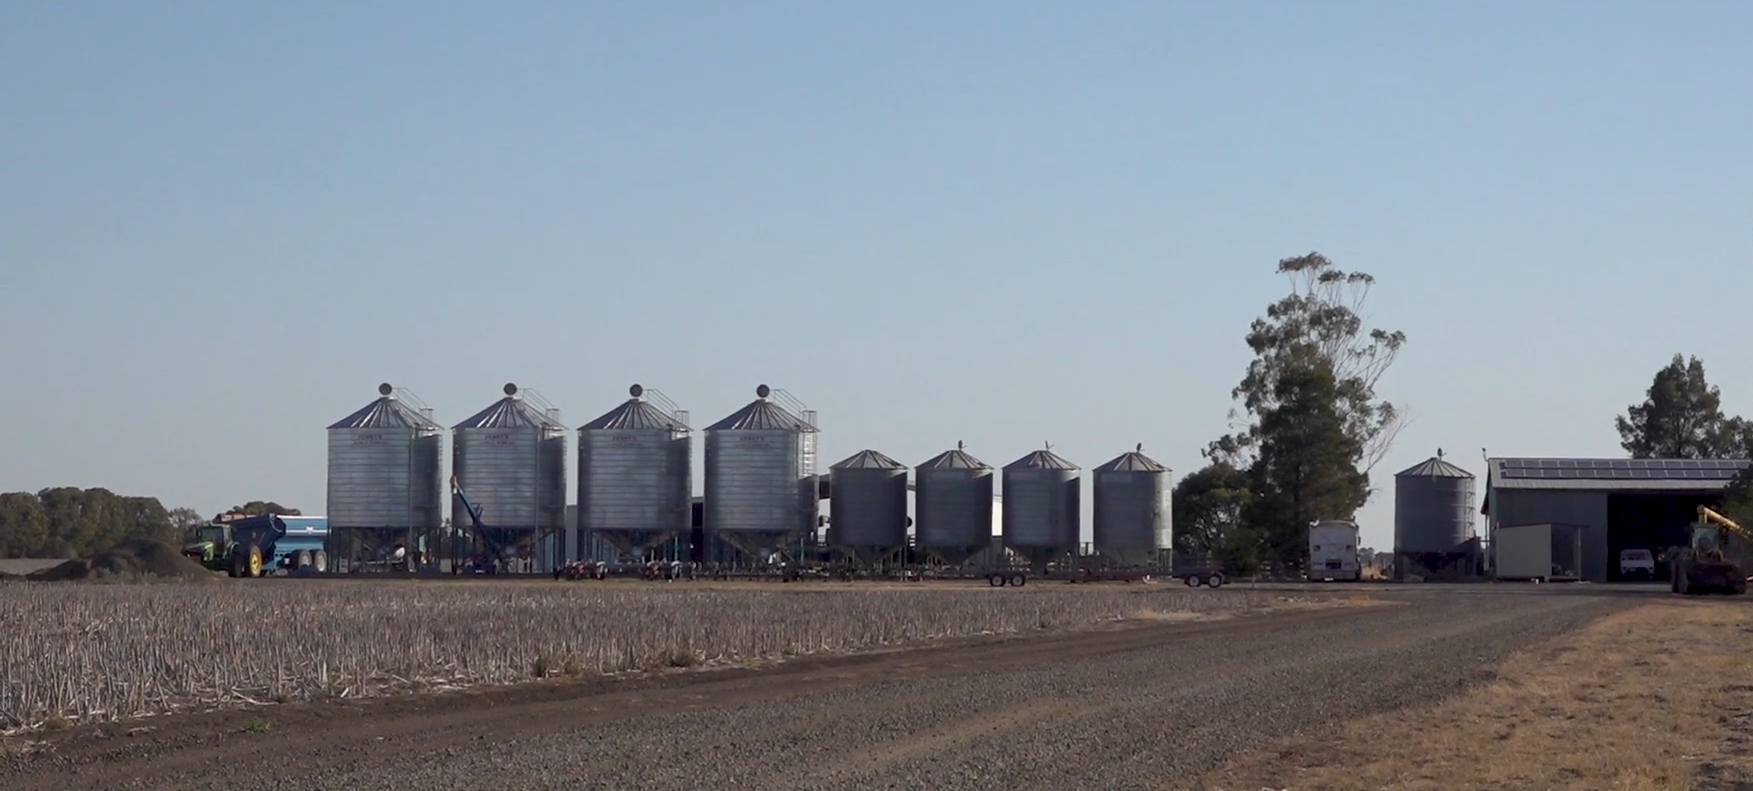 a farm with dry fields and silos in the background